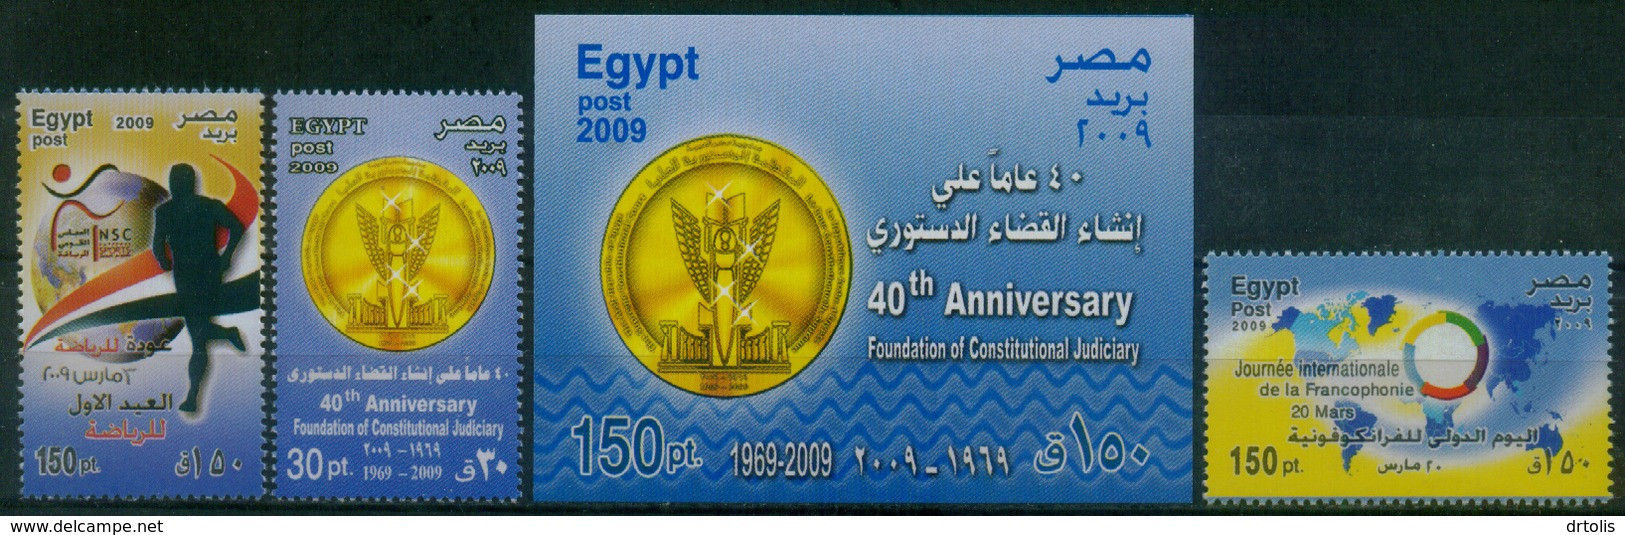 EGYPT / 2009 / COMPLETE YEAR ISSUES / MNH / VF / 7 SCANS . - Unused Stamps